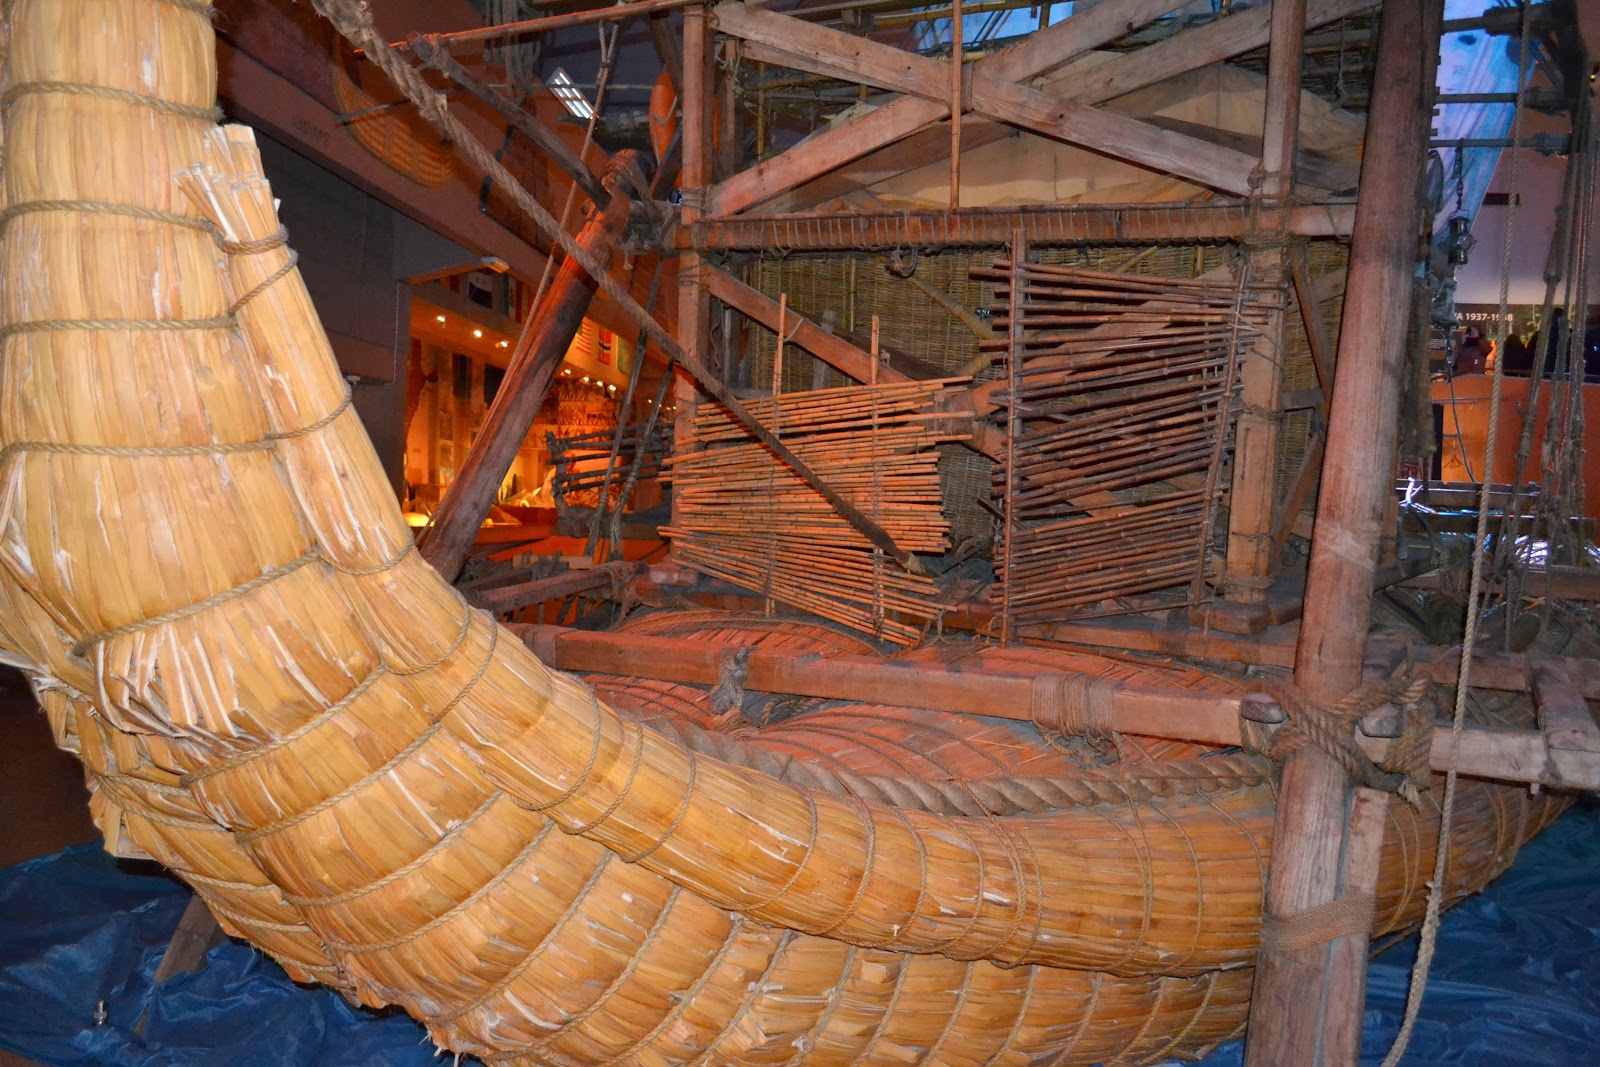 Closure look of The vessel used in historical expedition